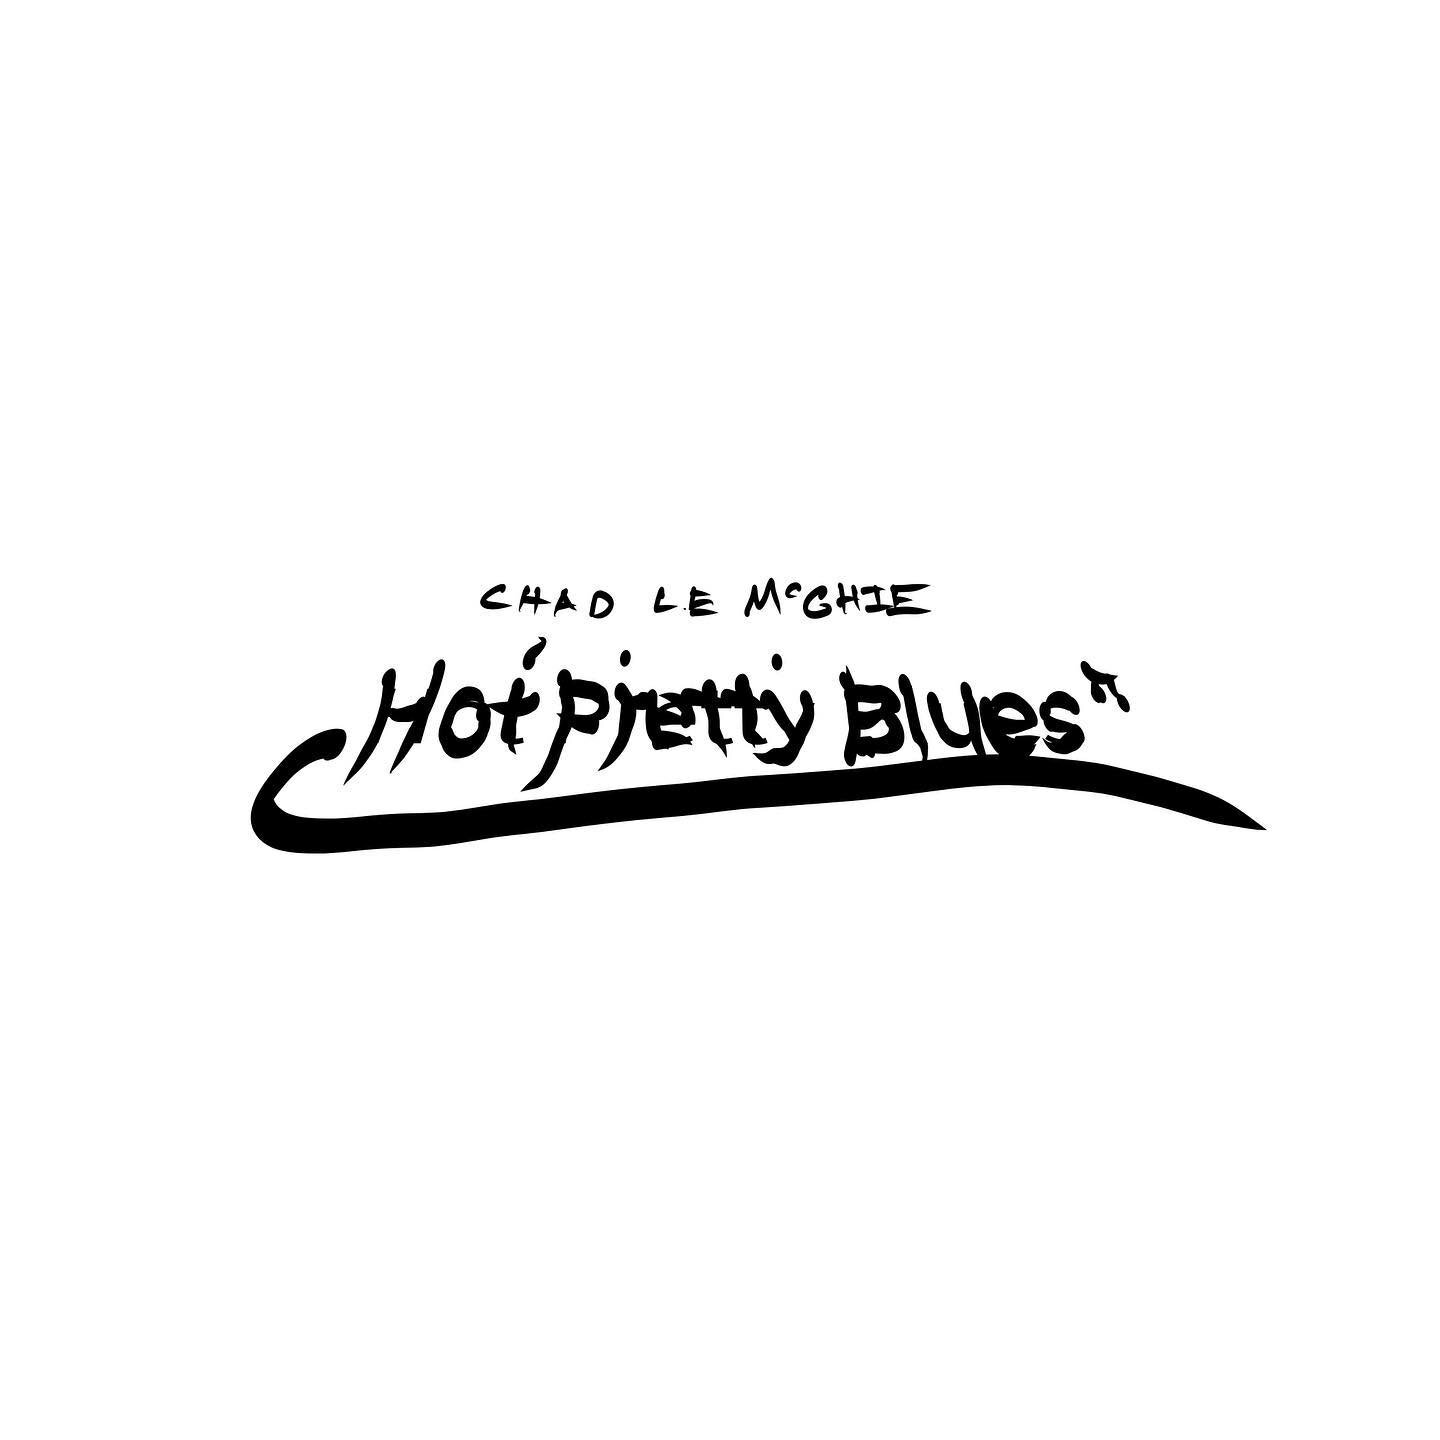 Life is rarely rosy. 

A massive new project from author and musician Chad L.E McGhie, Hot Pretty Blues is an thrilling, emotionally gripping modern drama, accompanied by the gripping lyrics and banging beats that you&rsquo;ve come to love. 

A story